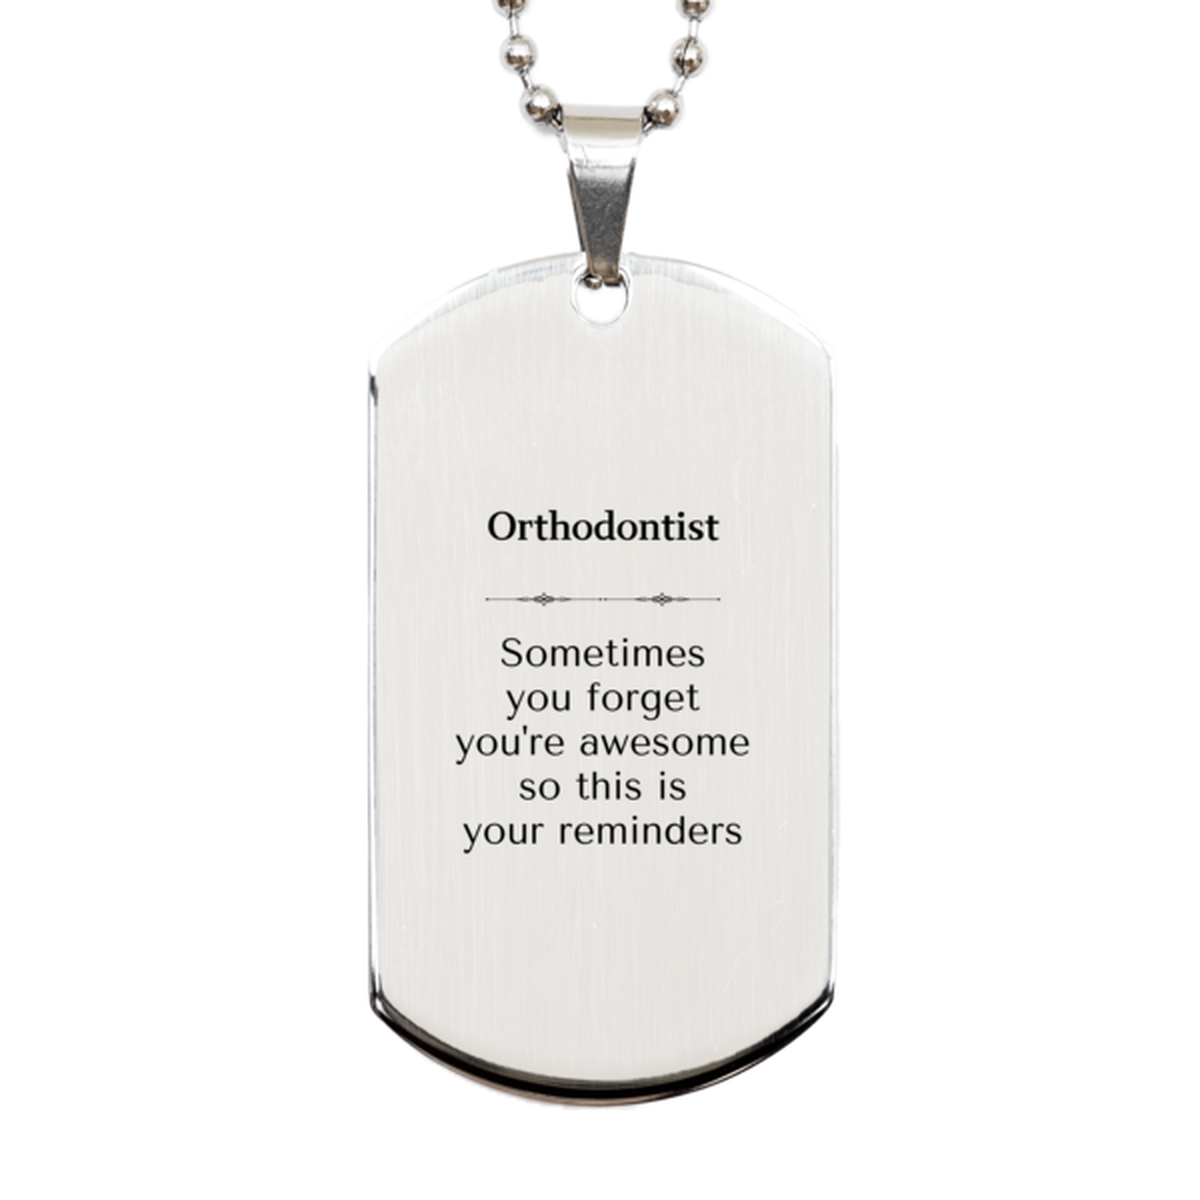 Sentimental Orthodontist Silver Dog Tag, Orthodontist Sometimes you forget you're awesome so this is your reminders, Graduation Christmas Birthday Gifts for Orthodontist, Men, Women, Coworkers